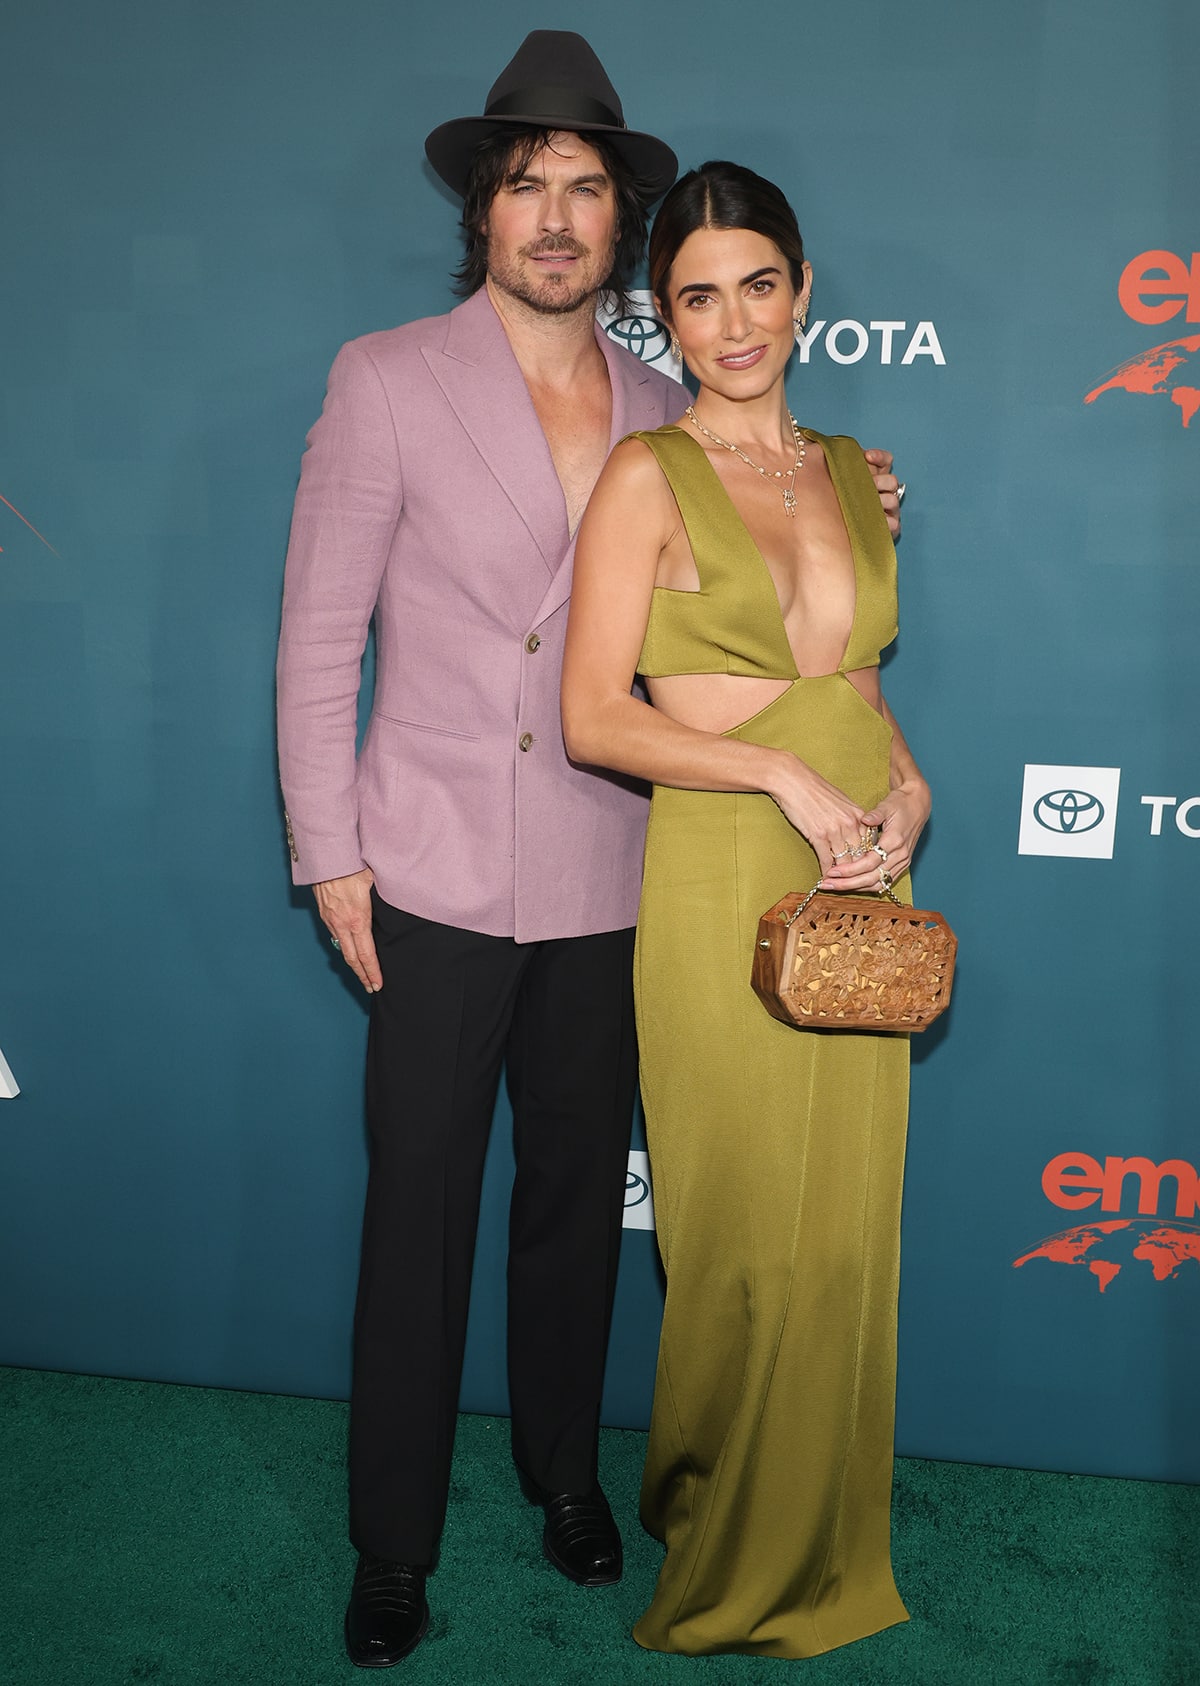 Ian Somerhalder embraces the shirtless trend underneath a lilac blazer while Nikki Reed steals the show in a plunging green gown